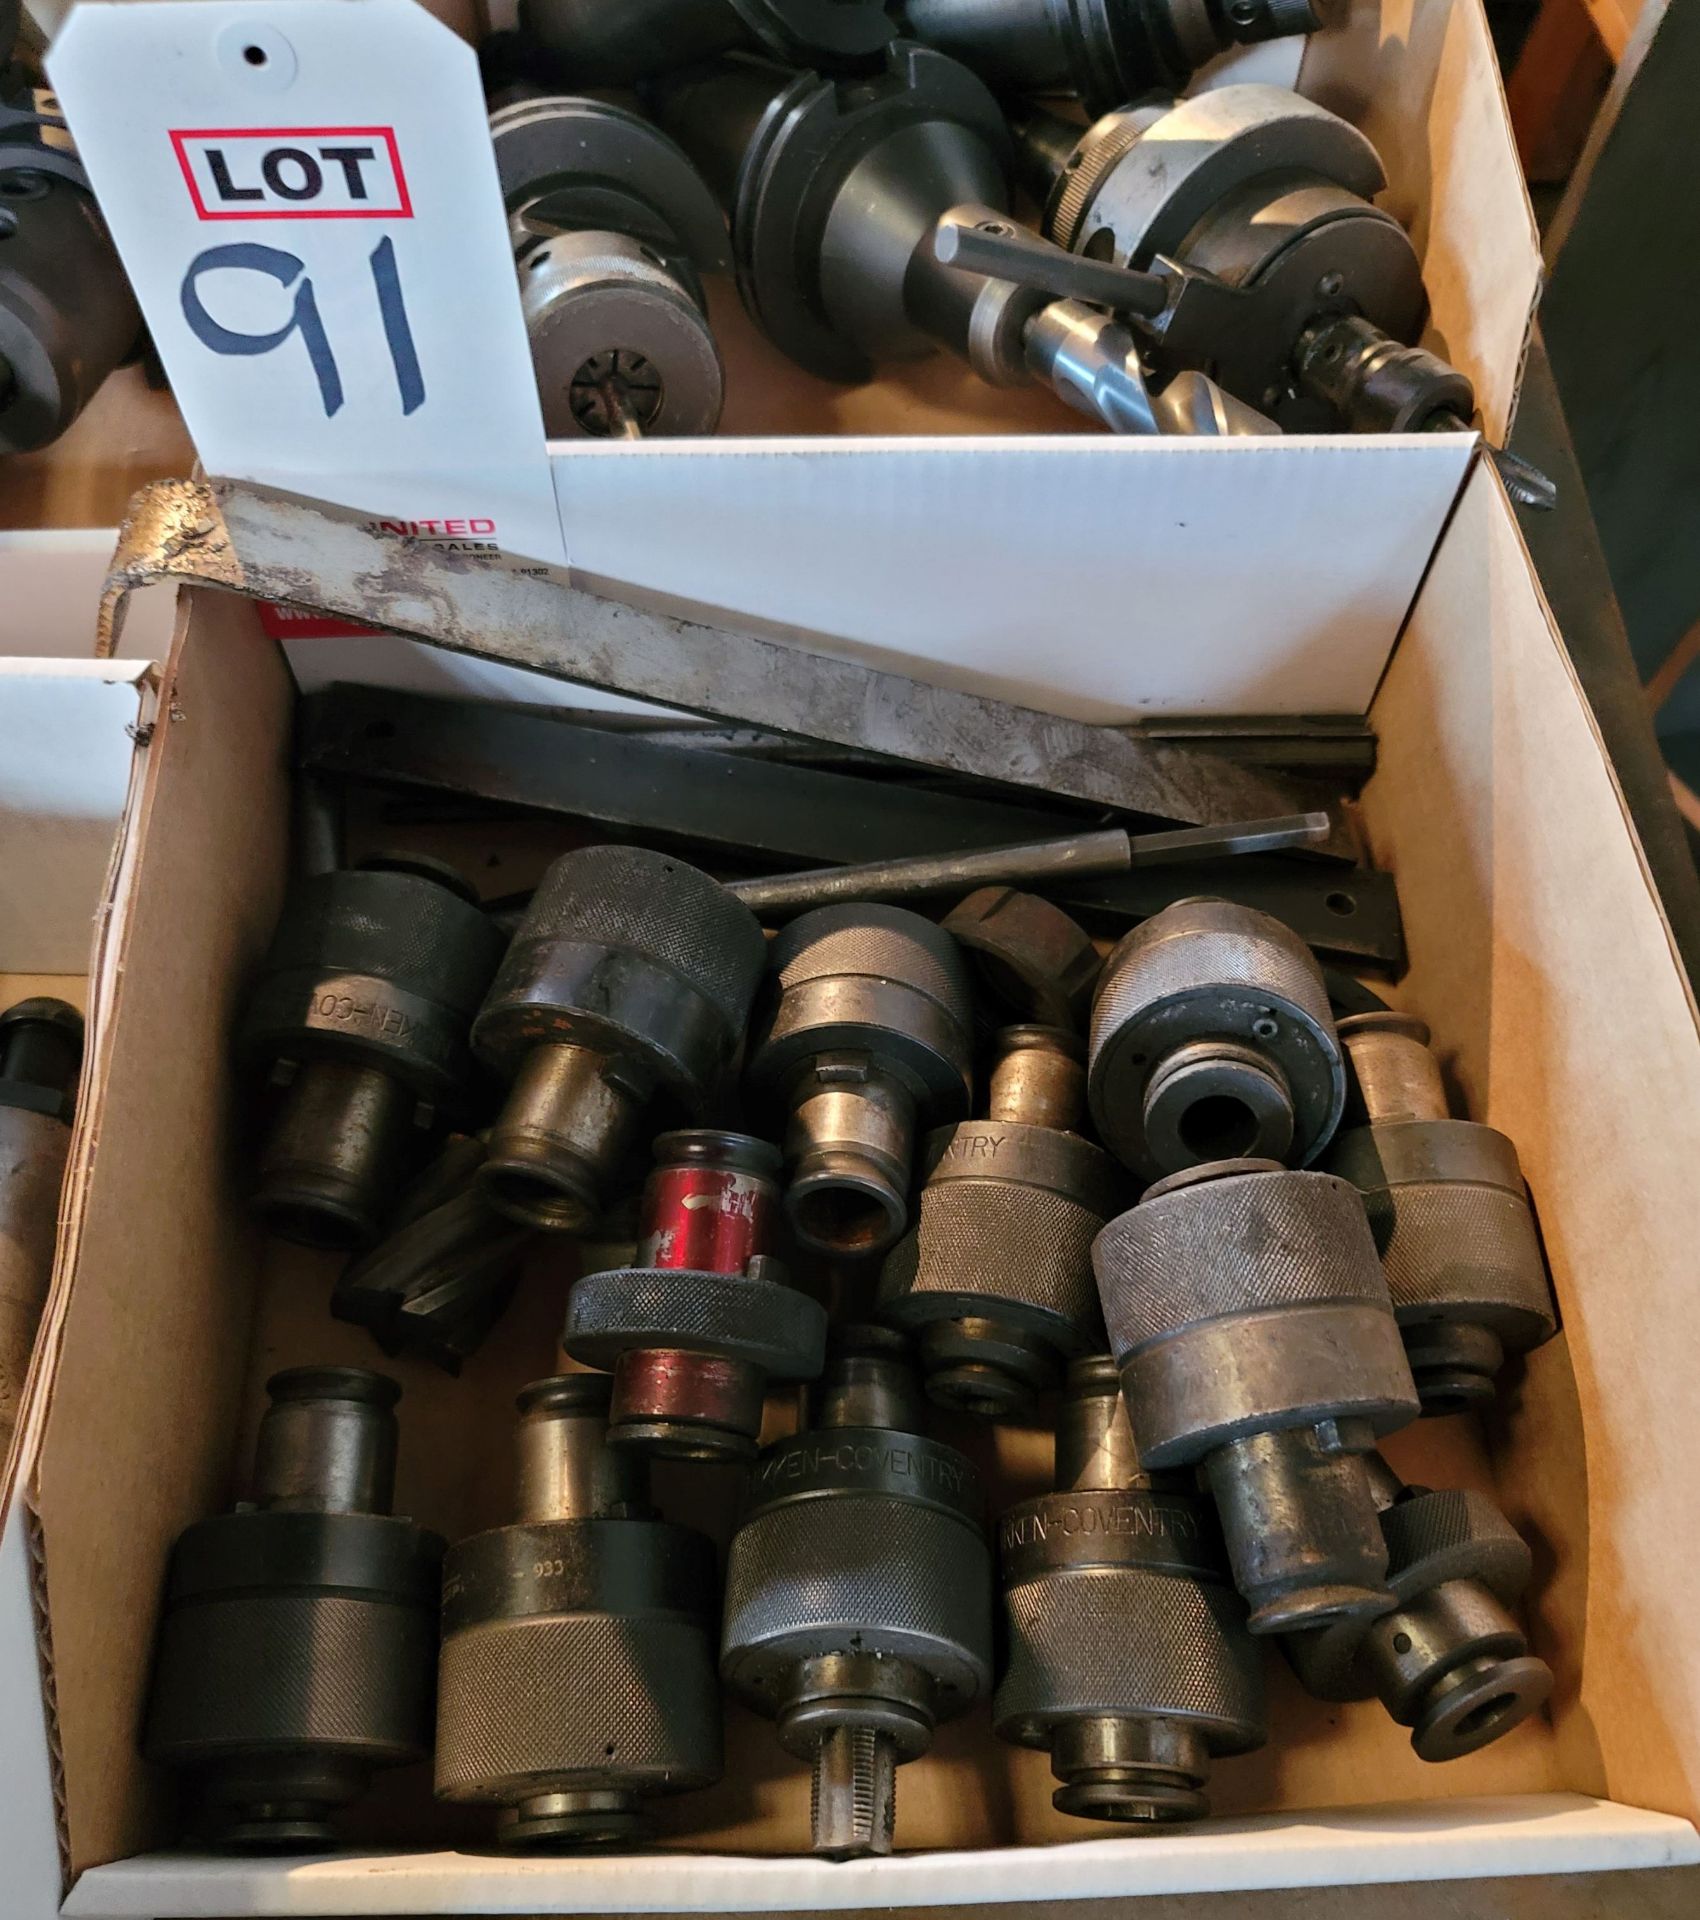 LOT - QUICK CHANGE TAP HOLDERS